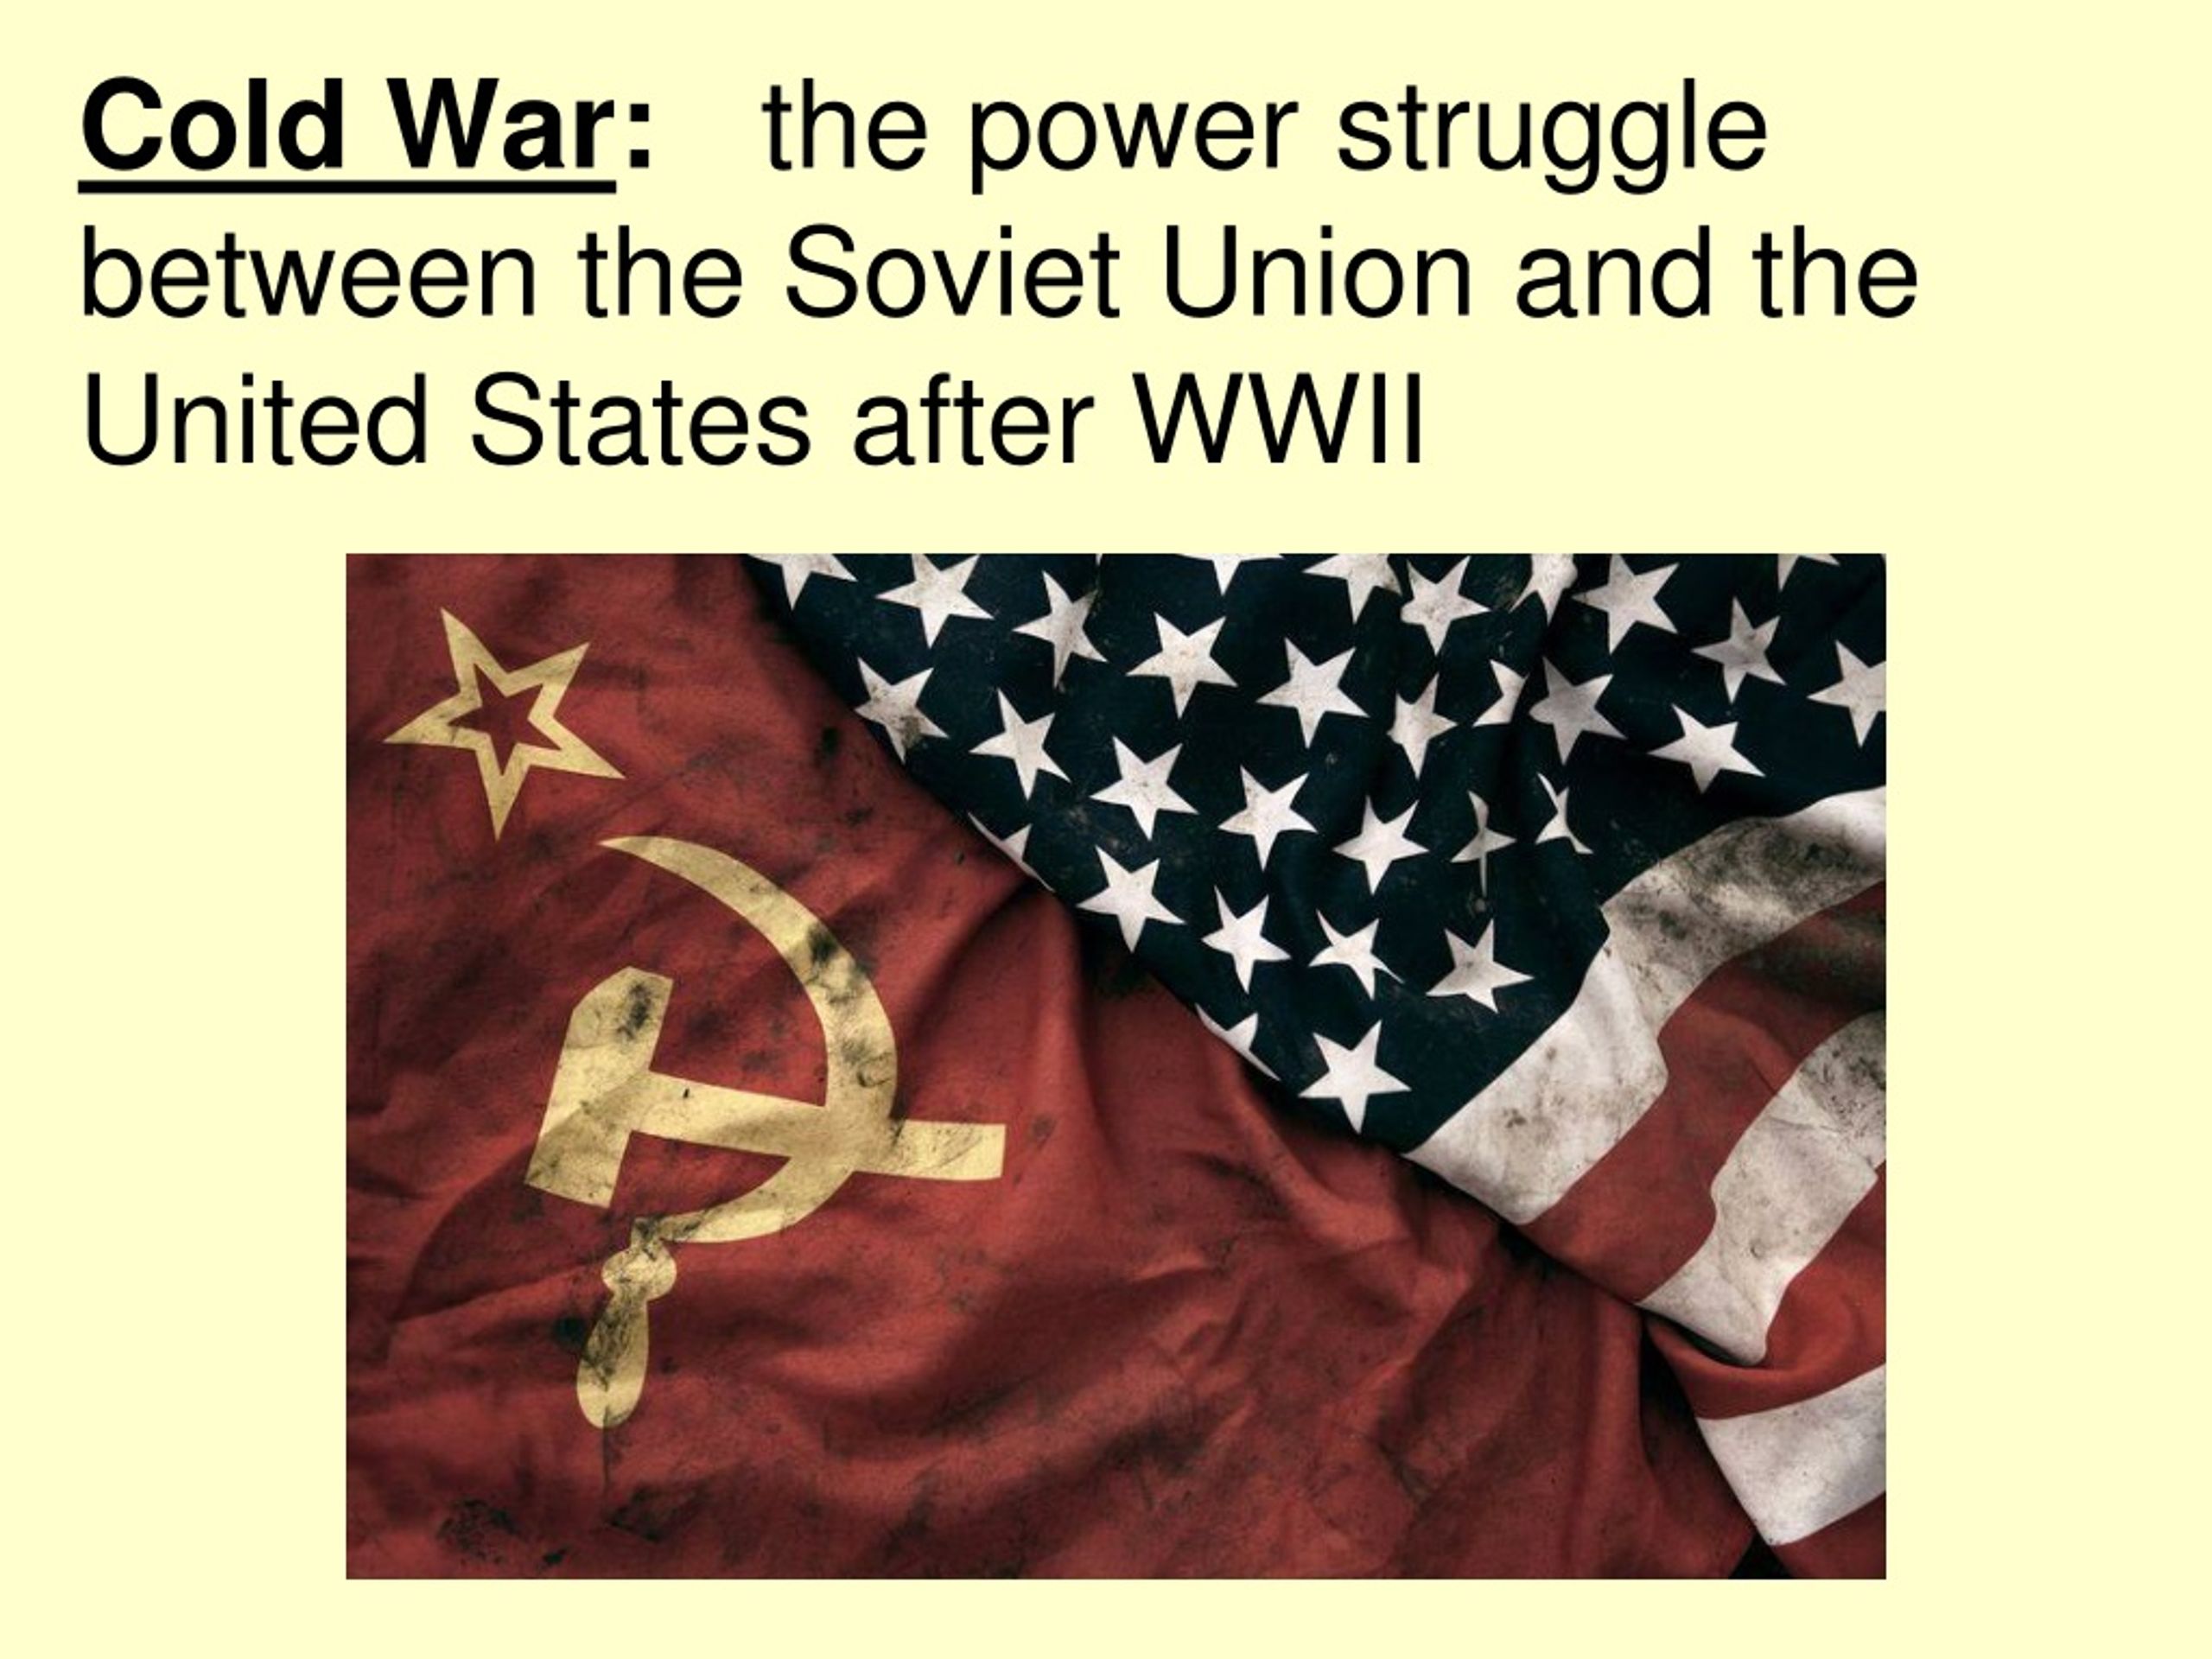 why was the conflict between the us and the soviet union called the cold war